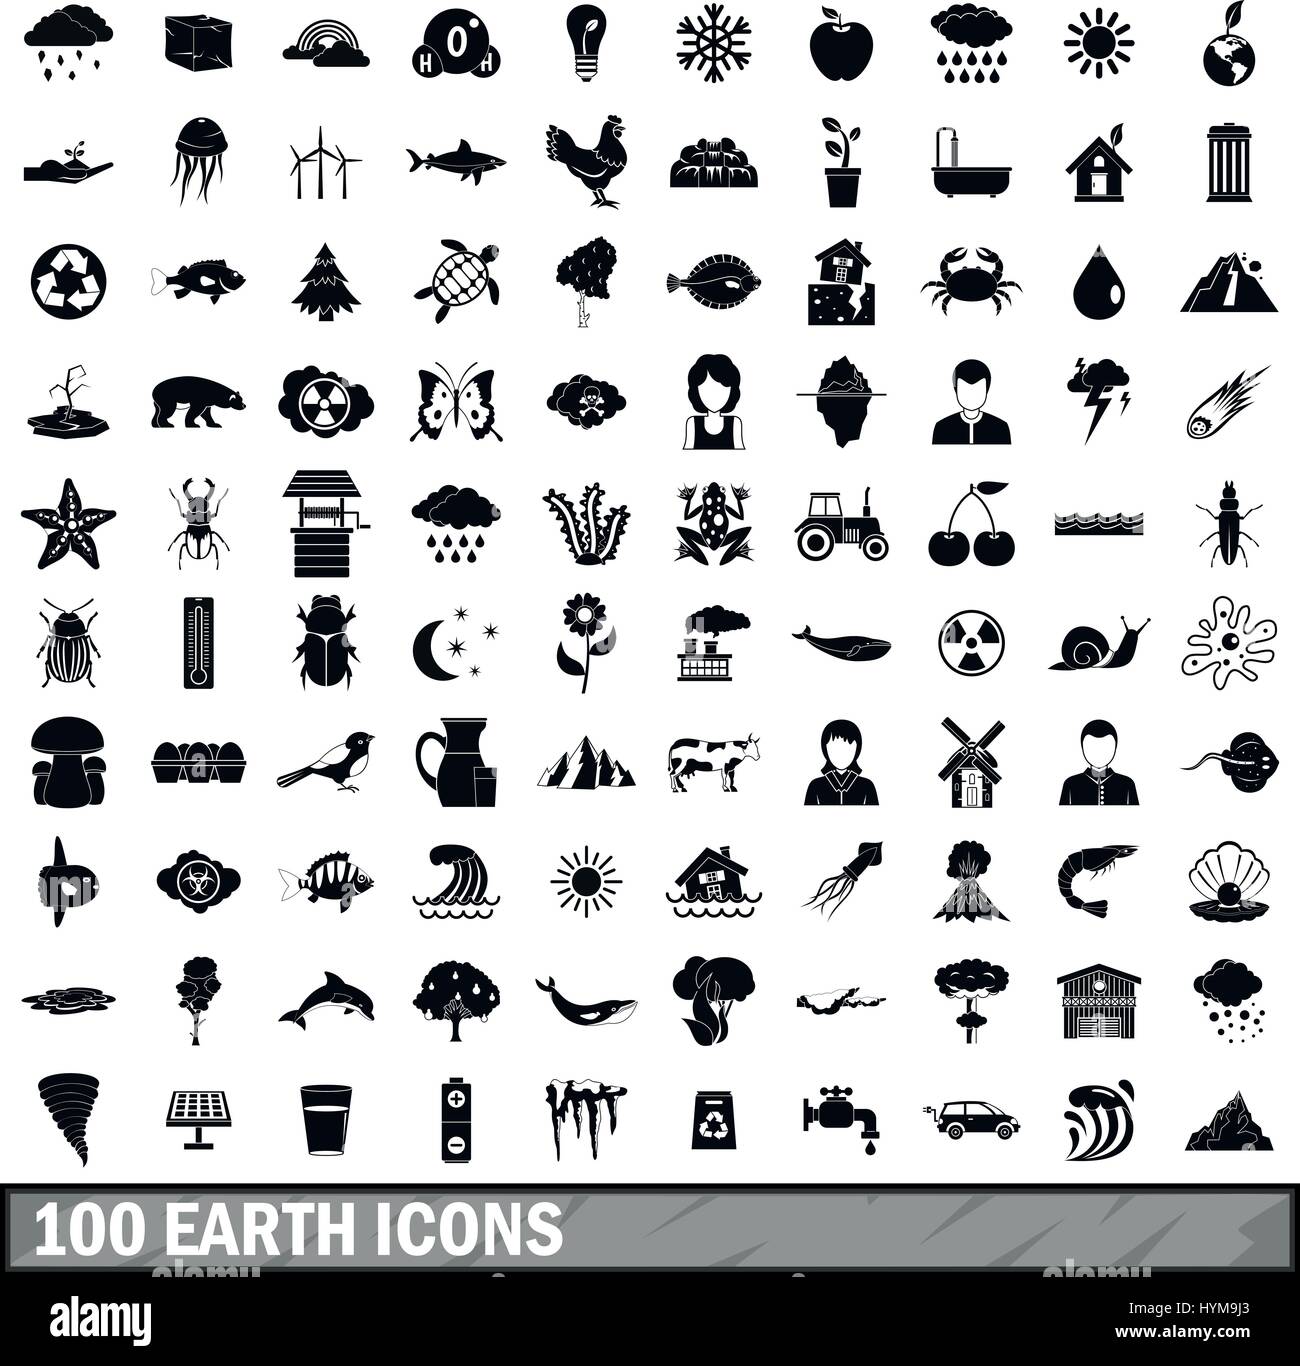 100 earth icons set, simple style  Stock Vector